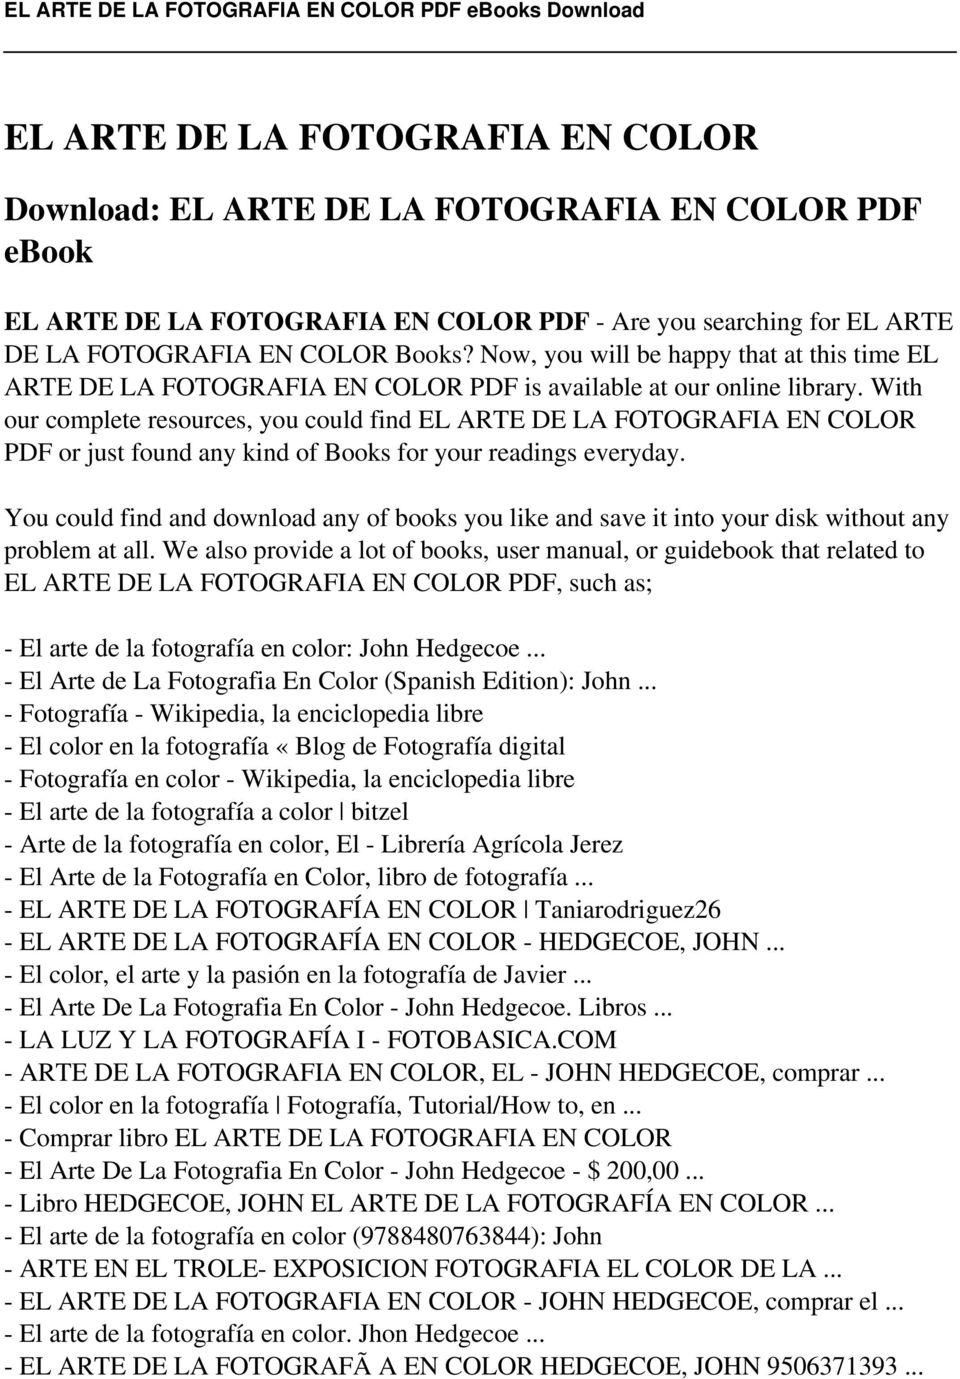 With our complete resources, you could find EL ARTE DE LA FOTOGRAFIA EN COLOR PDF or just found any kind of Books for your readings everyday.